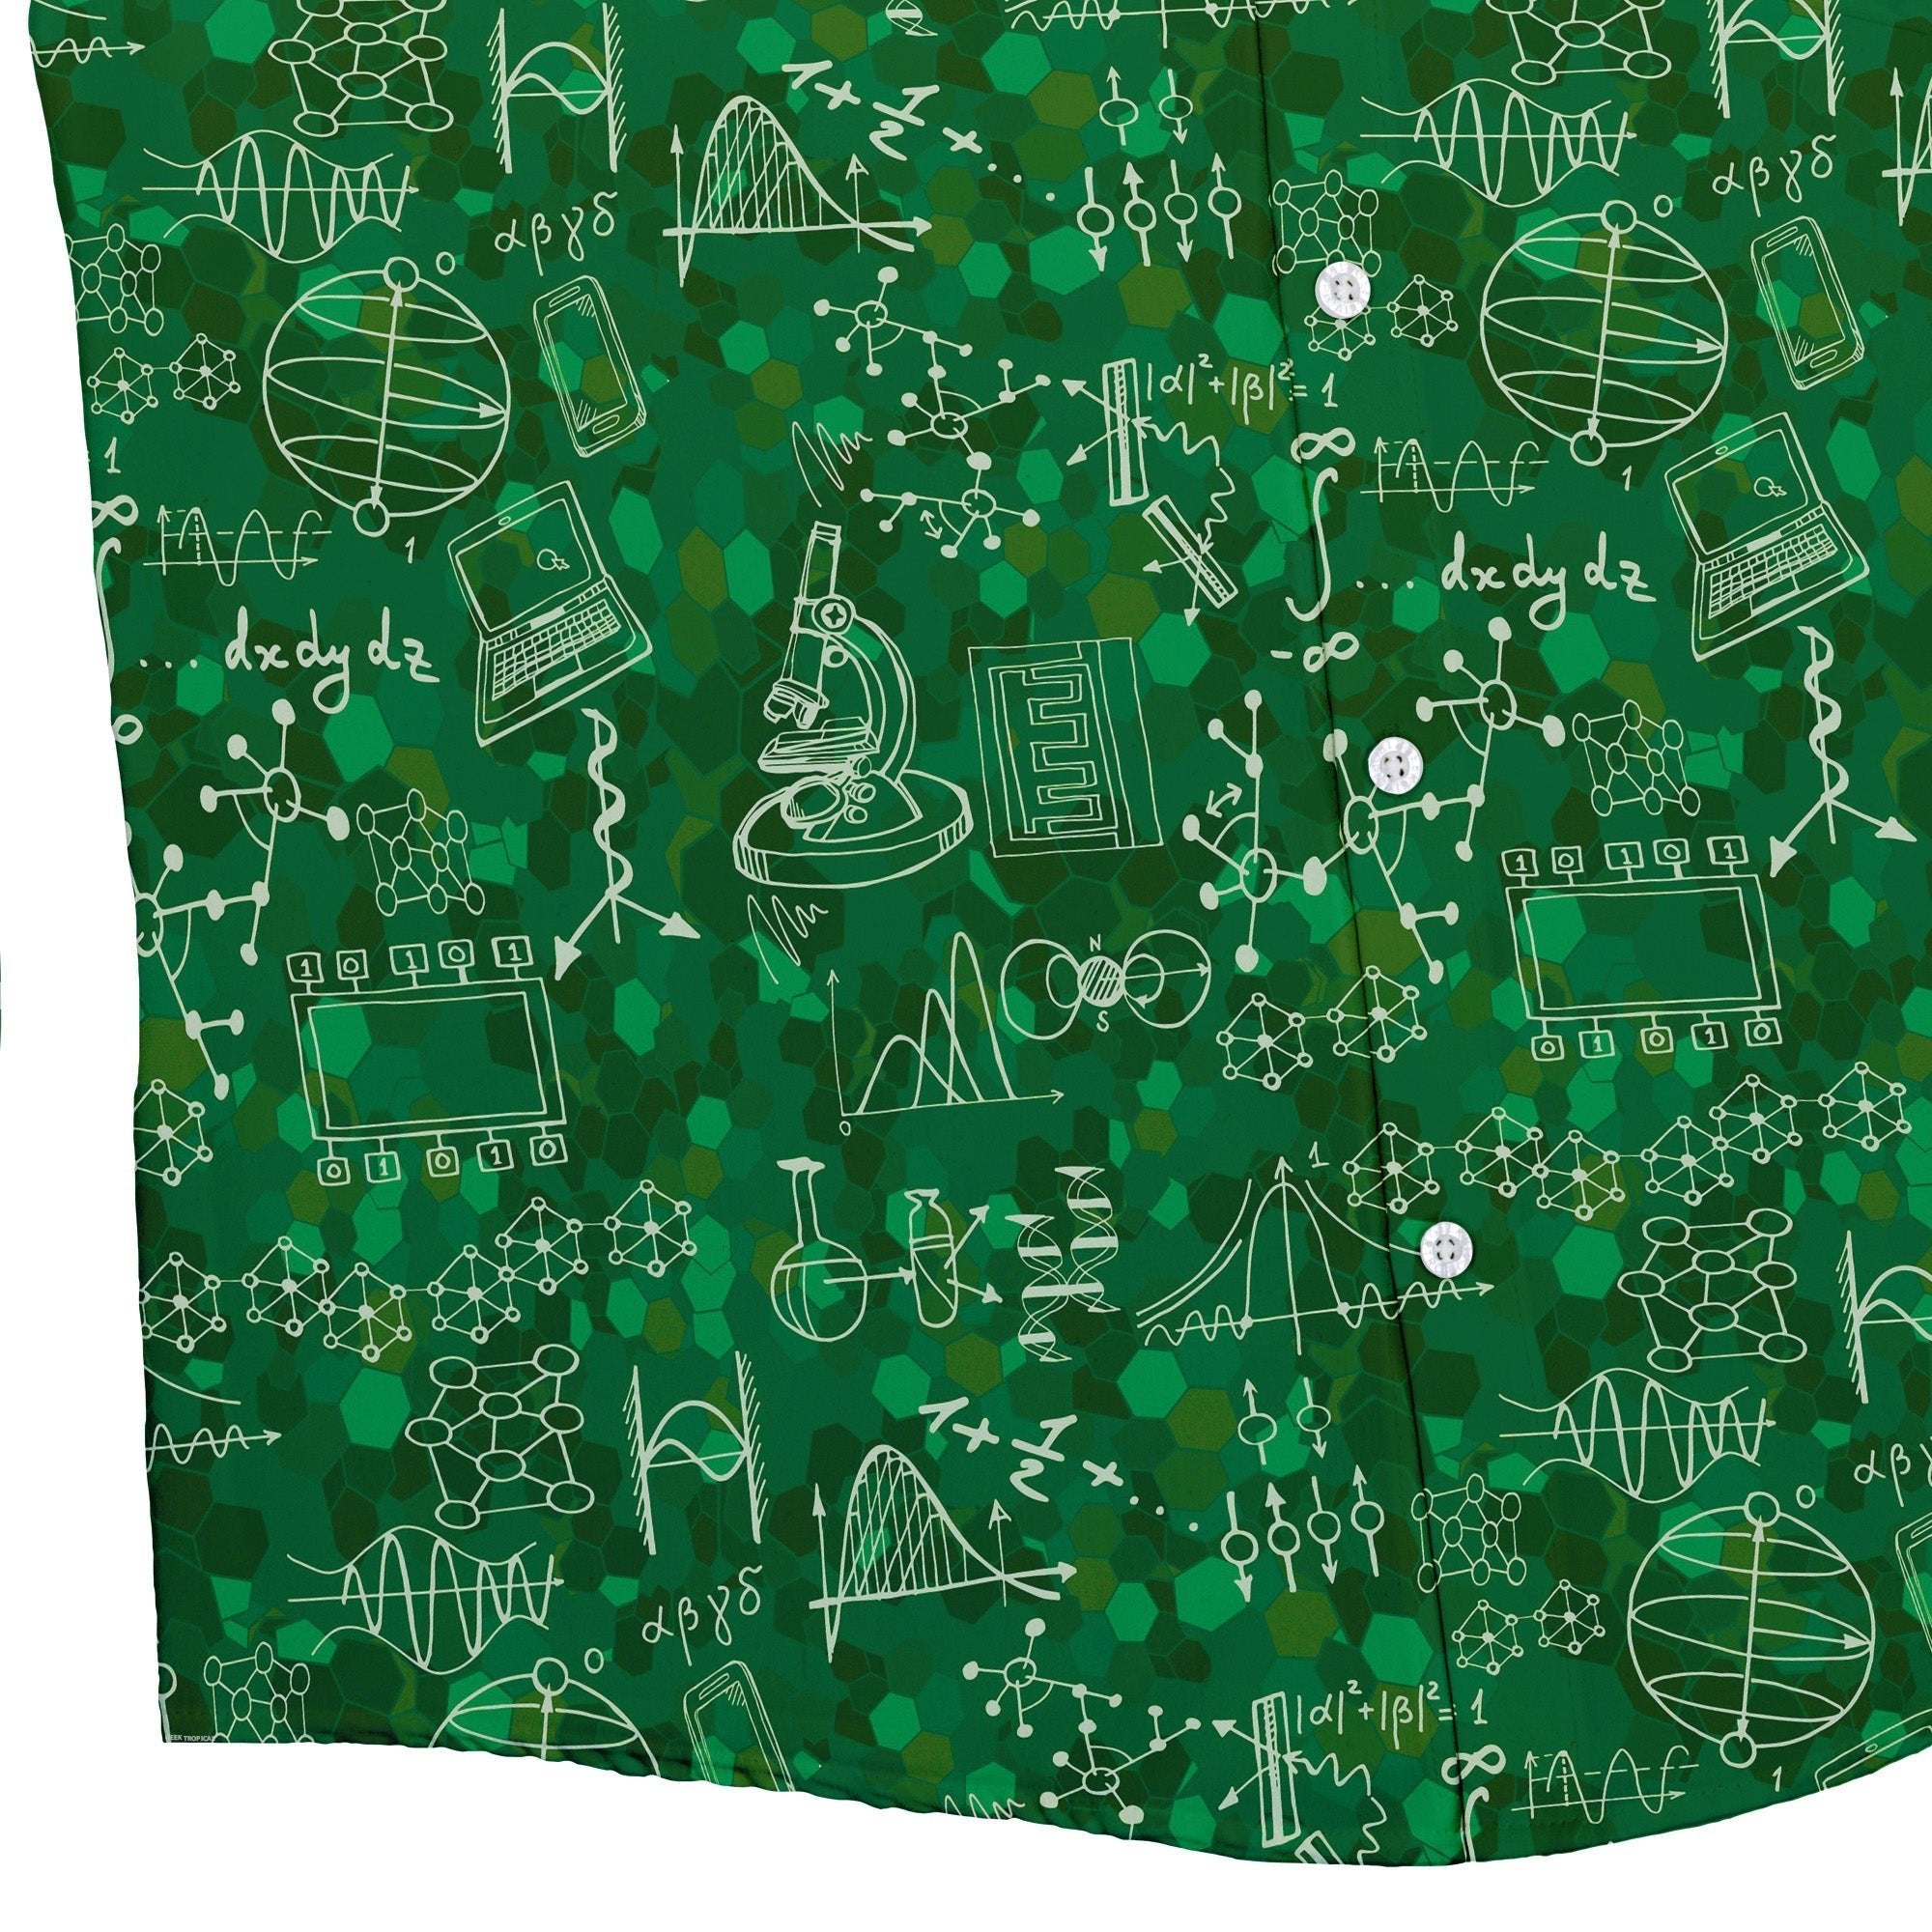 Mad Science Lab Green Button Up Shirt - adult sizing - Maximalist Patterns - science print